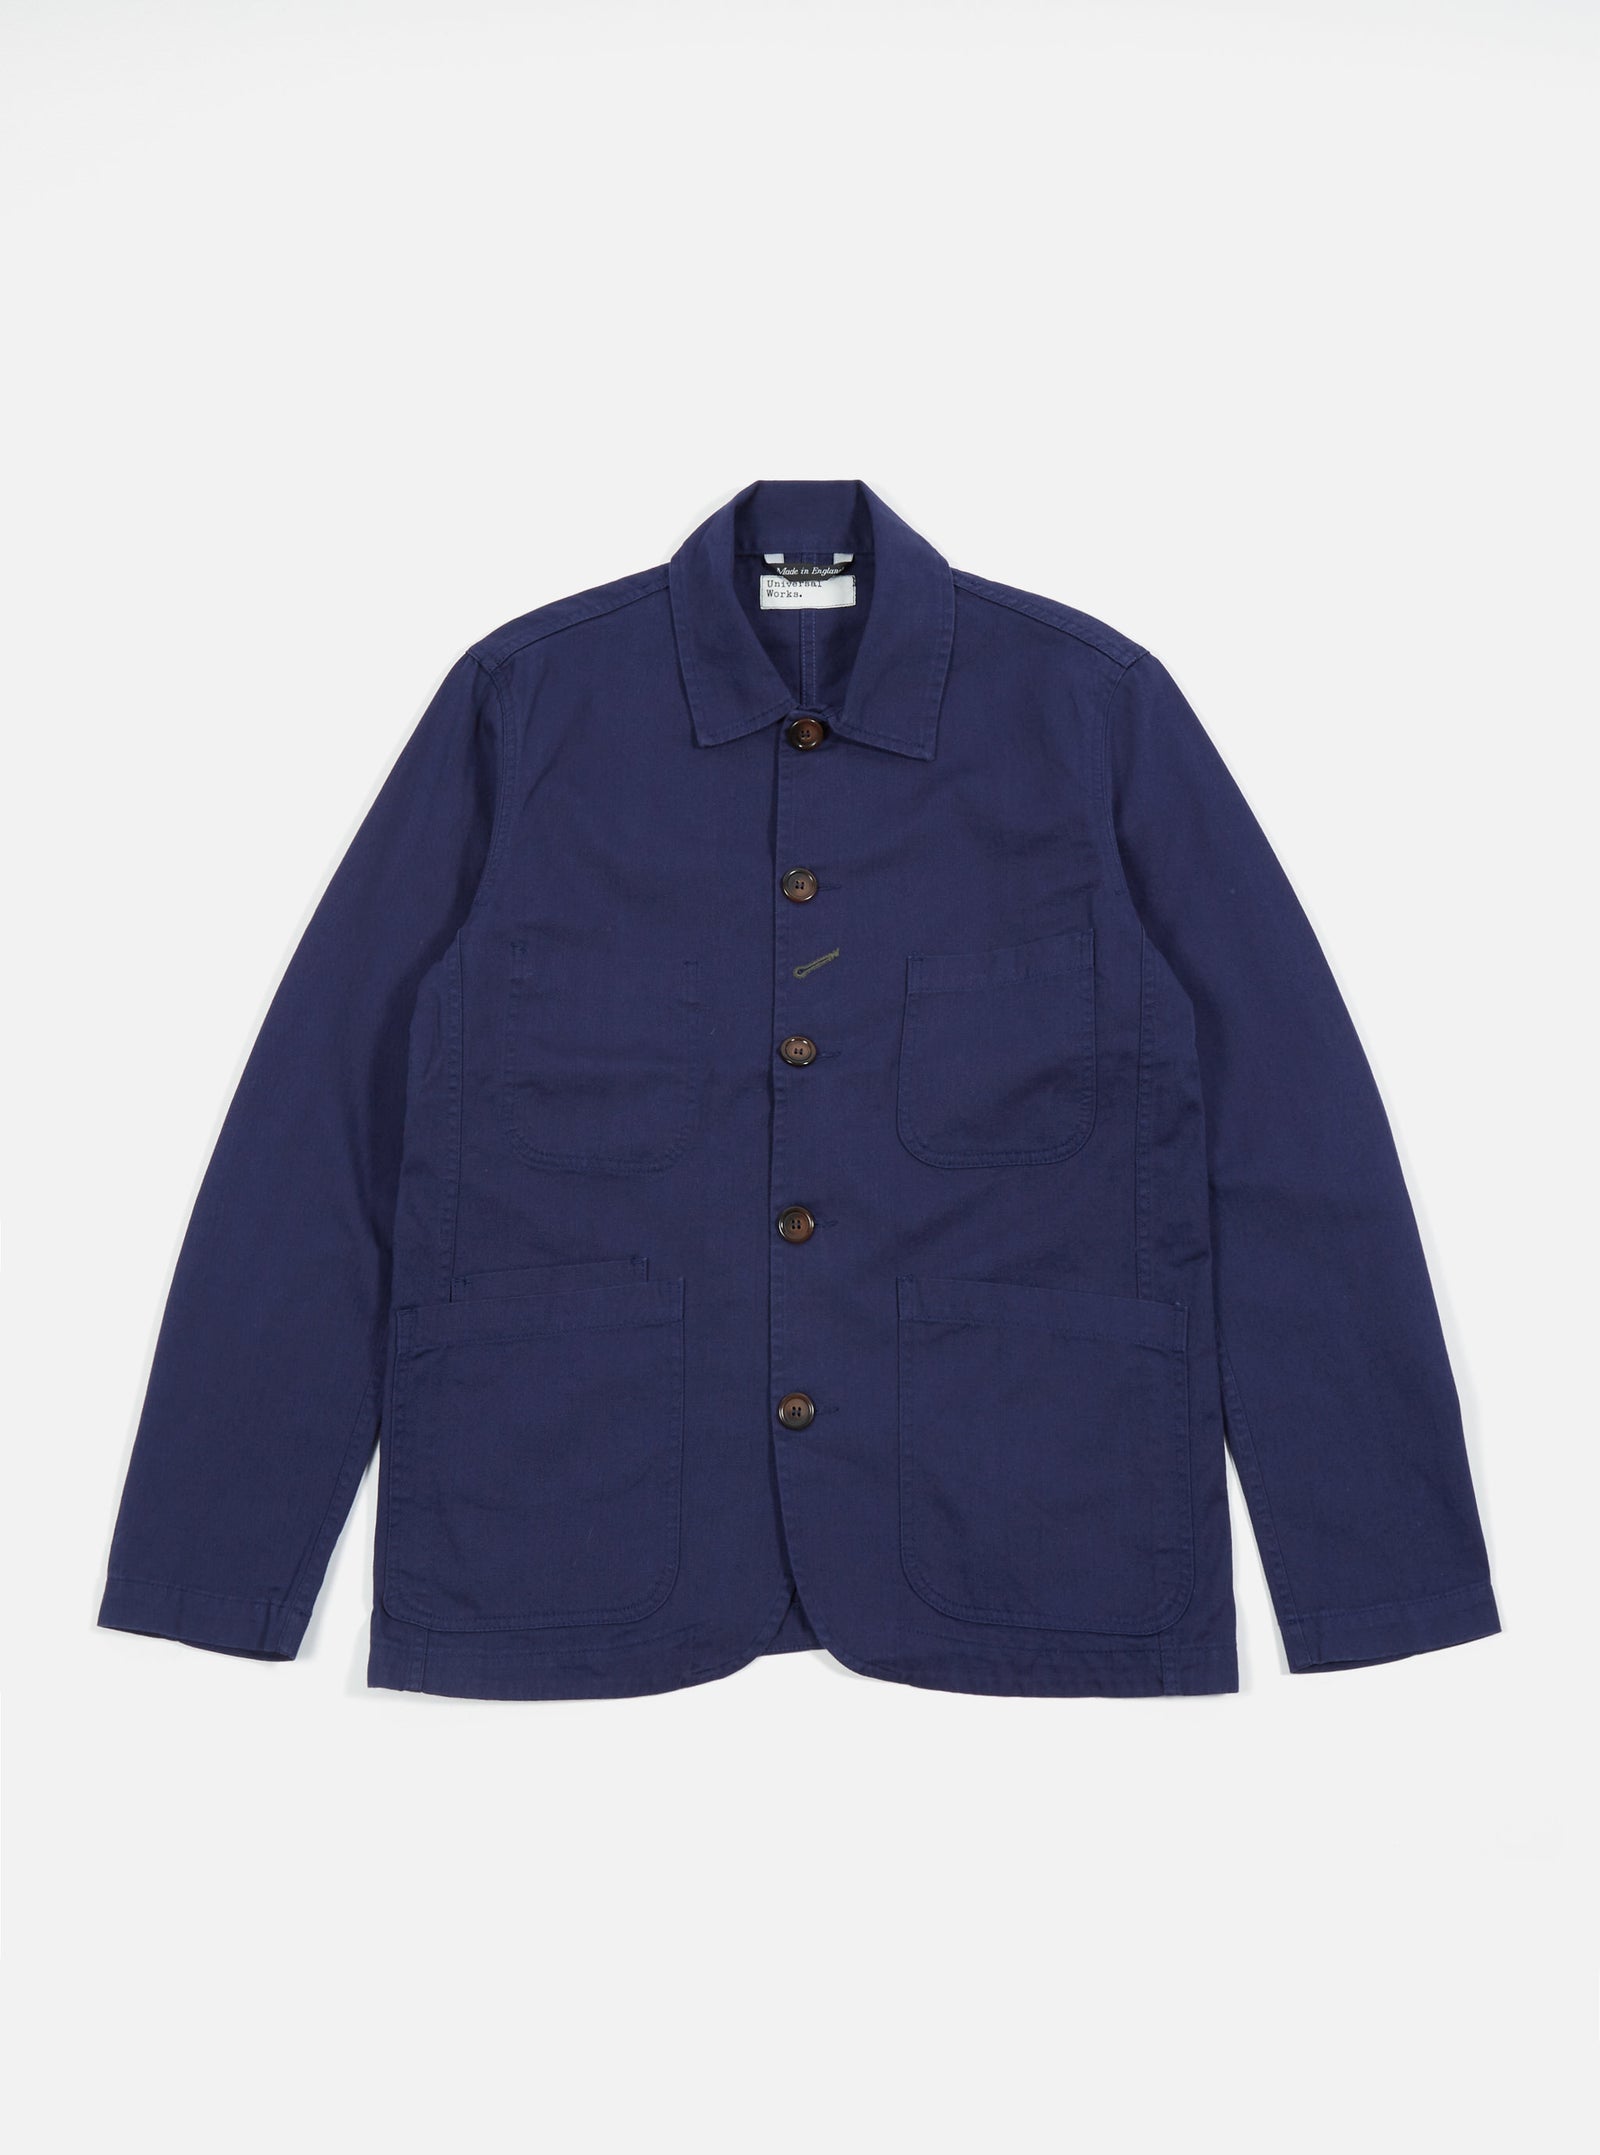 Universal Works Bakers Jacket in Royal Blue Byron Twill